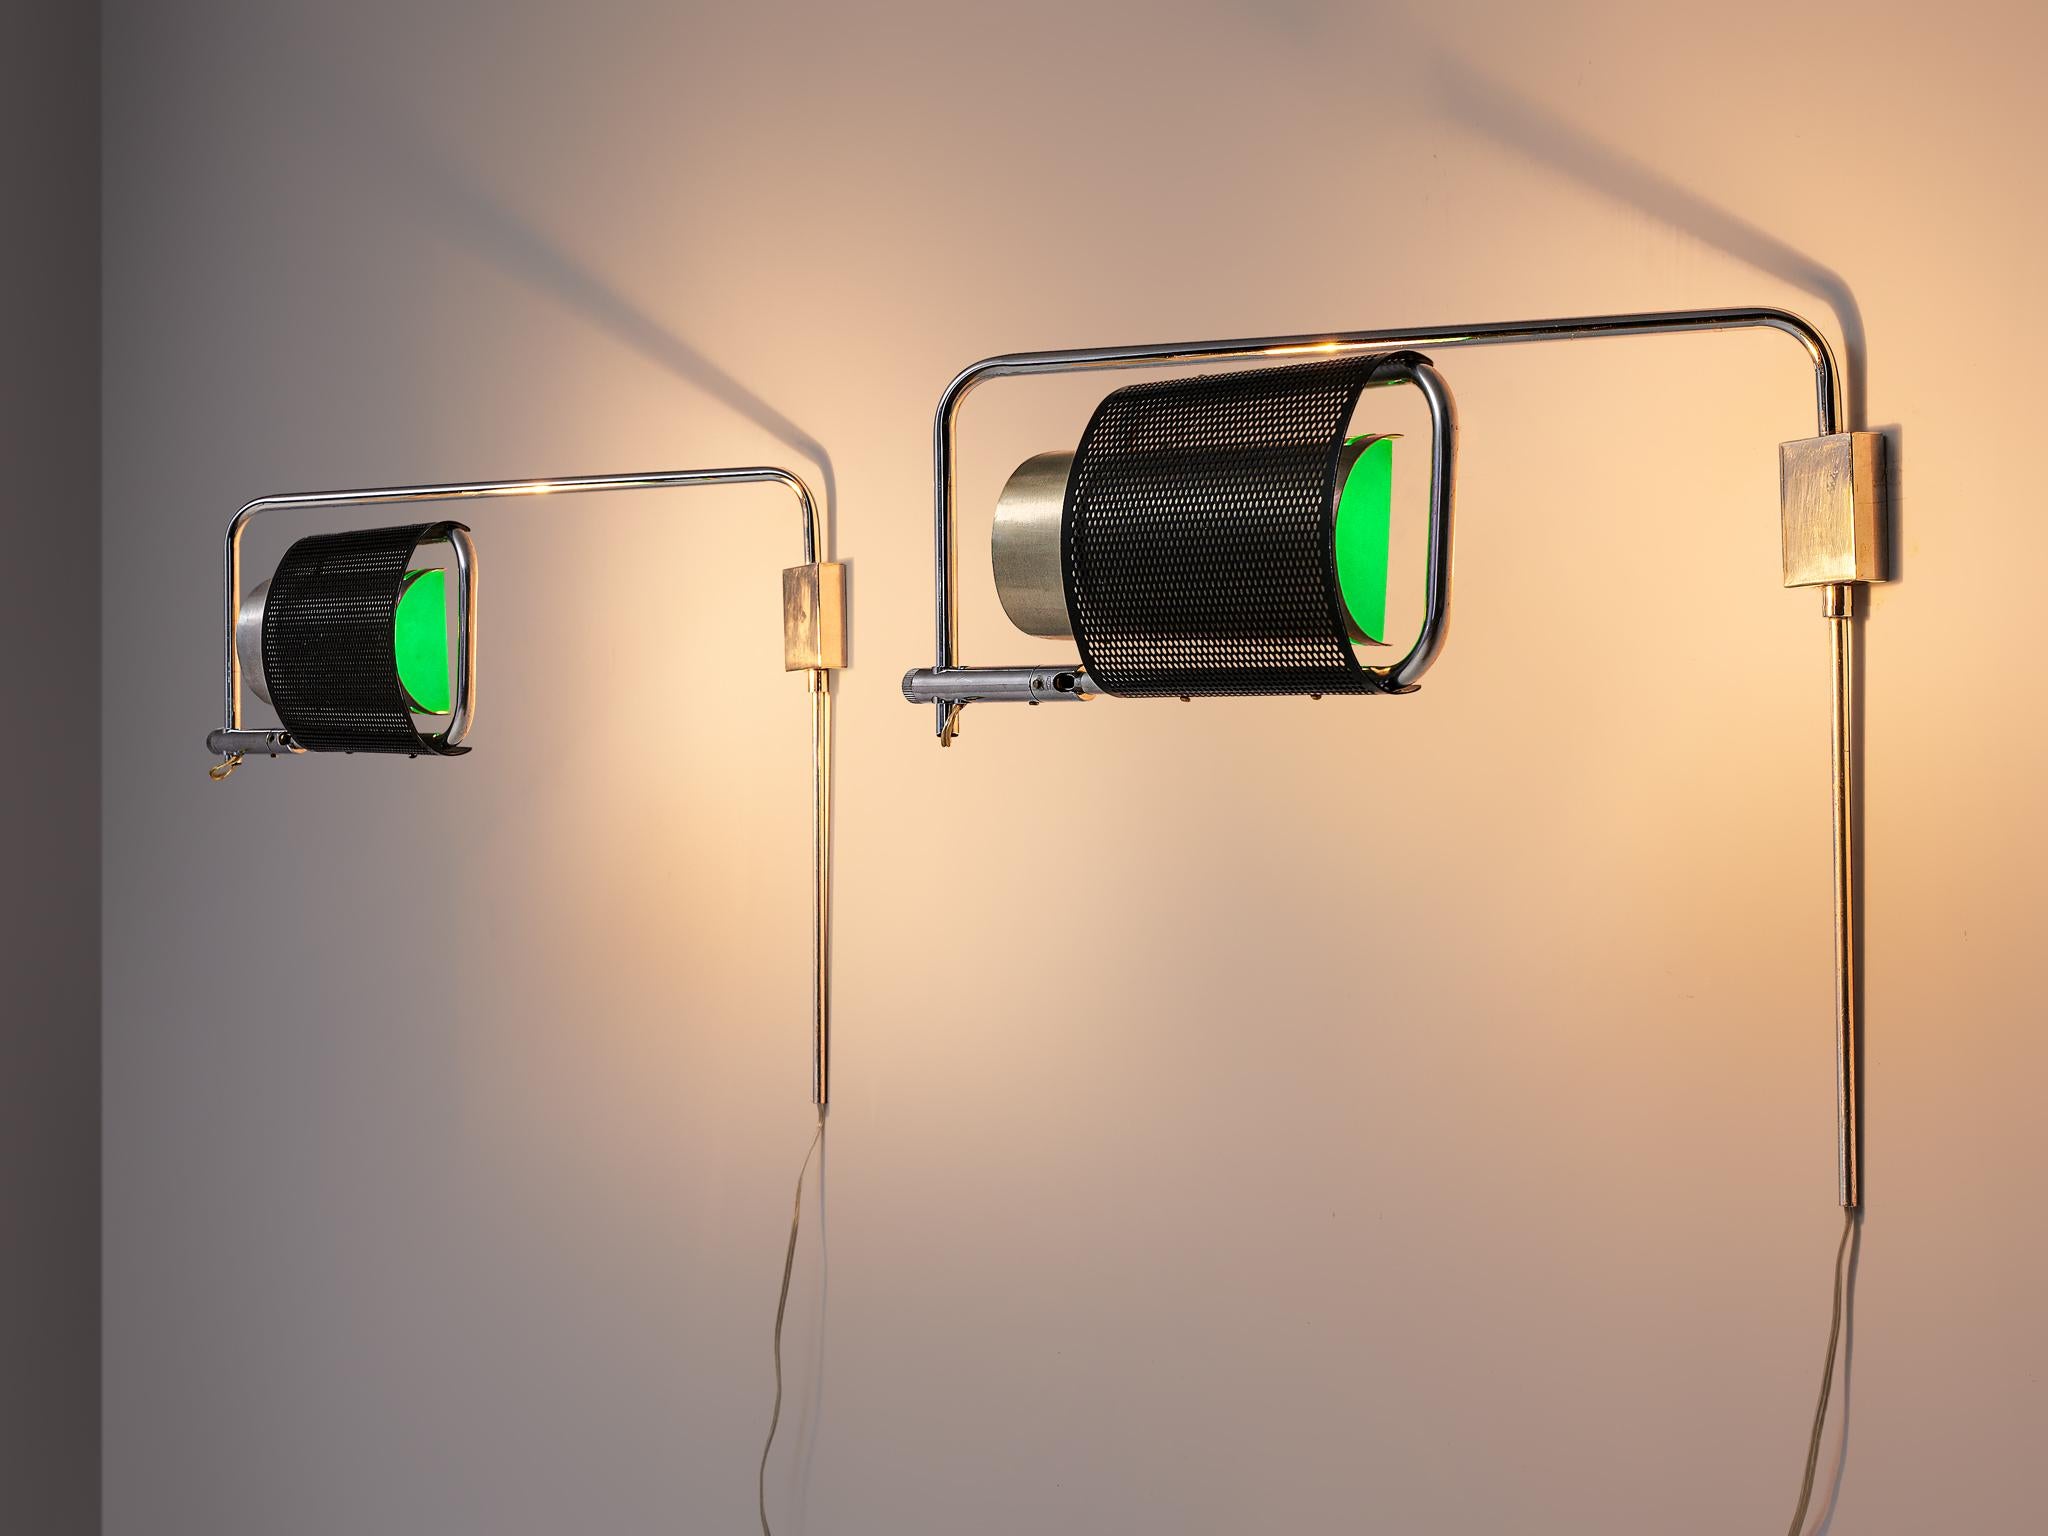 George Nelson & Associates for Koch & Lowy, pair of wall lamps model 'Eyeshade', steel, aluminum, United States, designed in 1975

Functional wall lights by George Nelson & Daniel Lewis designed in 1975. The lamp with two shades is fully adjustable